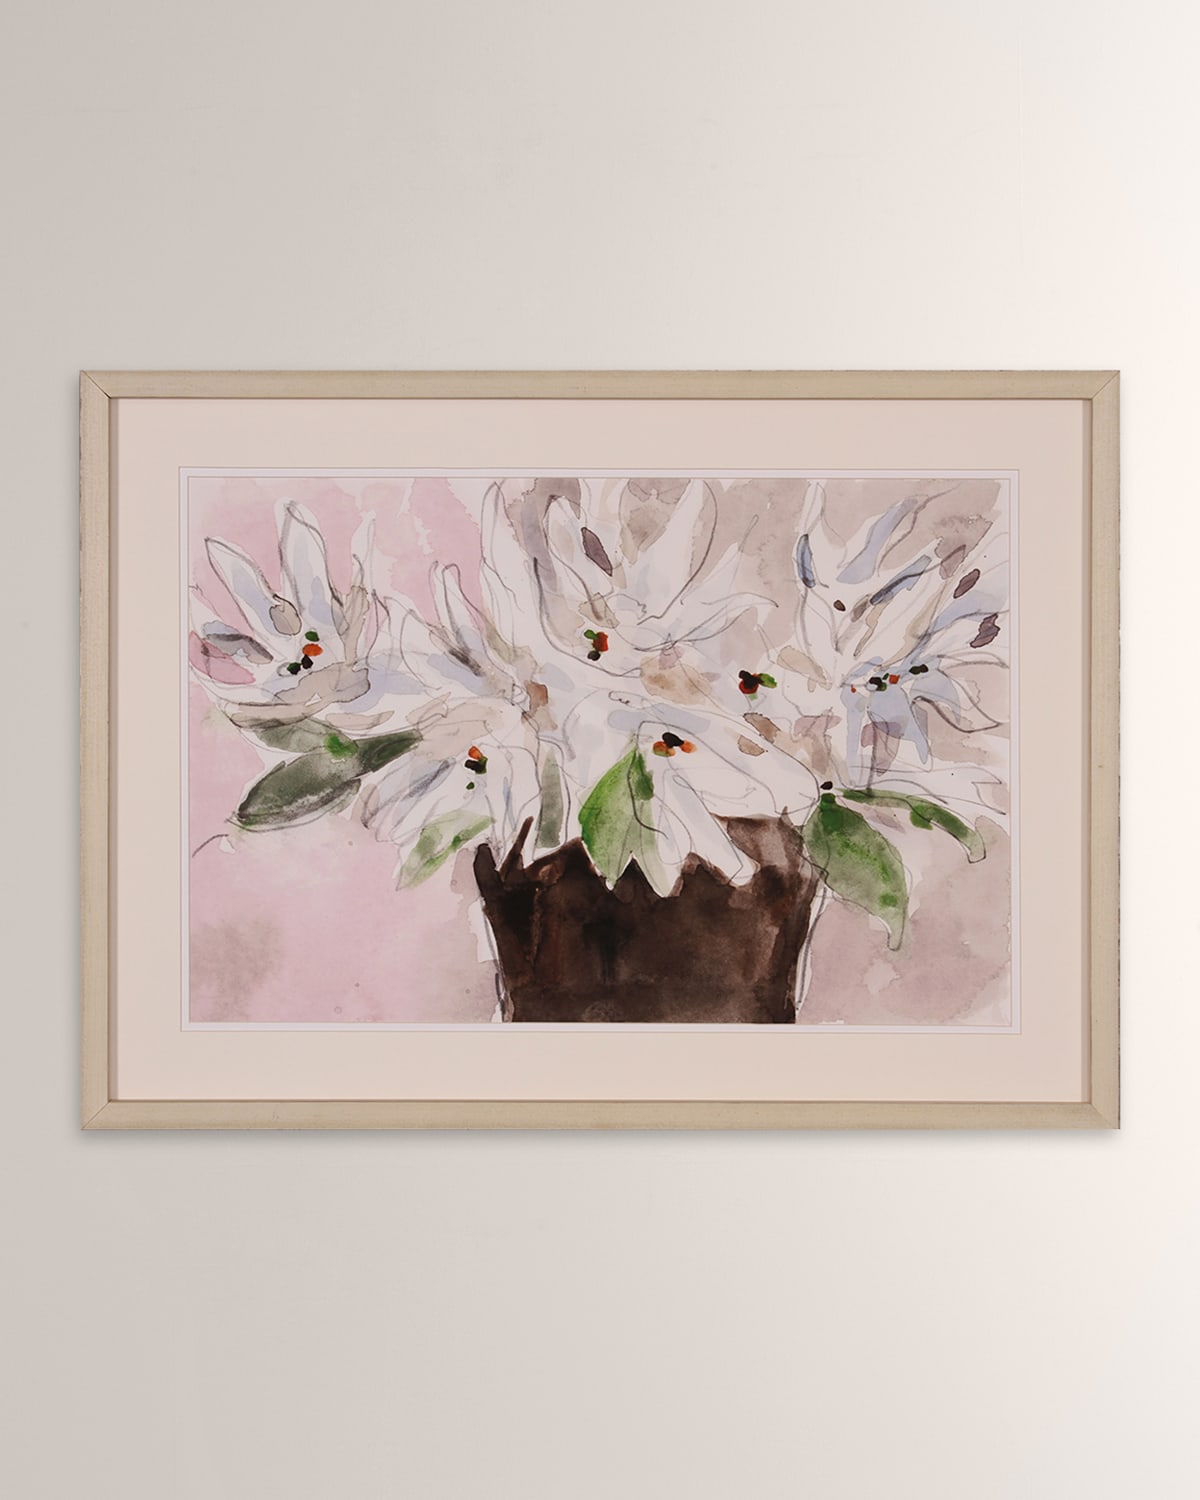 Shadow Catchers Magnolia I Giclee On Printed Paper, 30" X 22"